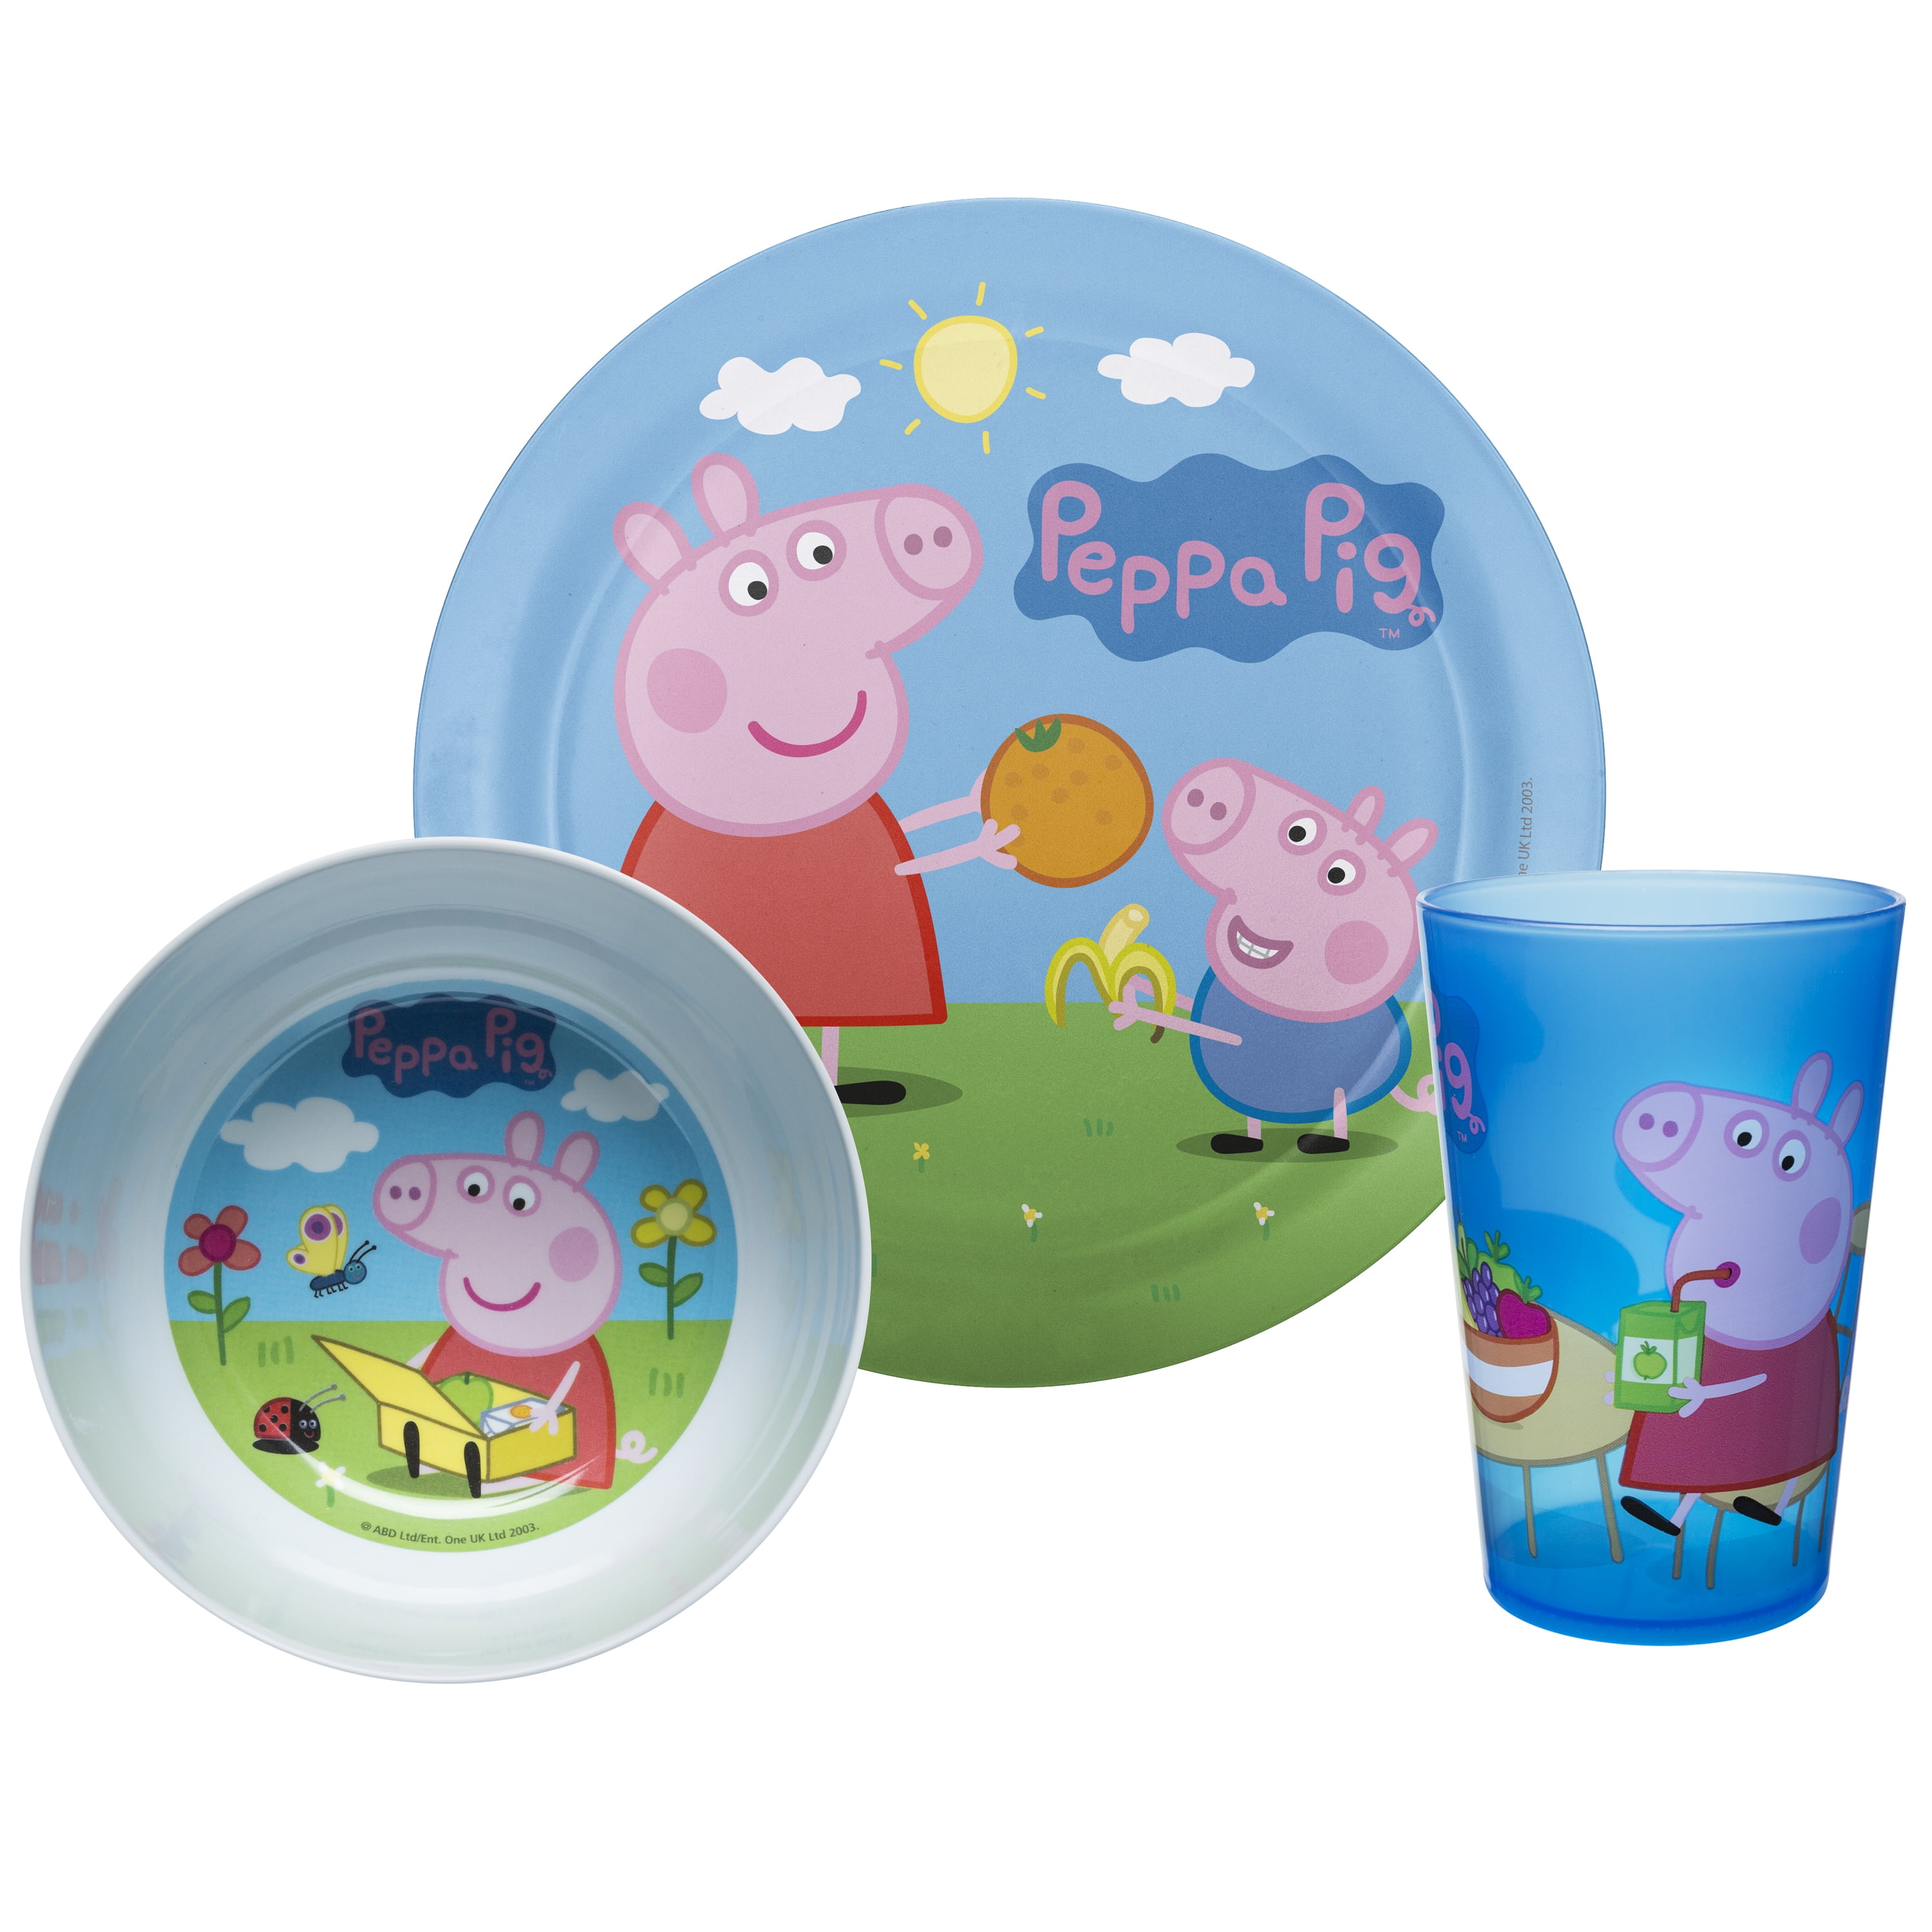 Kids Tableware Set – 3 Piece Reusable PP Plate, Bowl & Cup Set for Children  – Skye, Chase, Marshall, Rubble Tumbler & Dinnerware Set for Mealtimes -  China Kids Tableware price